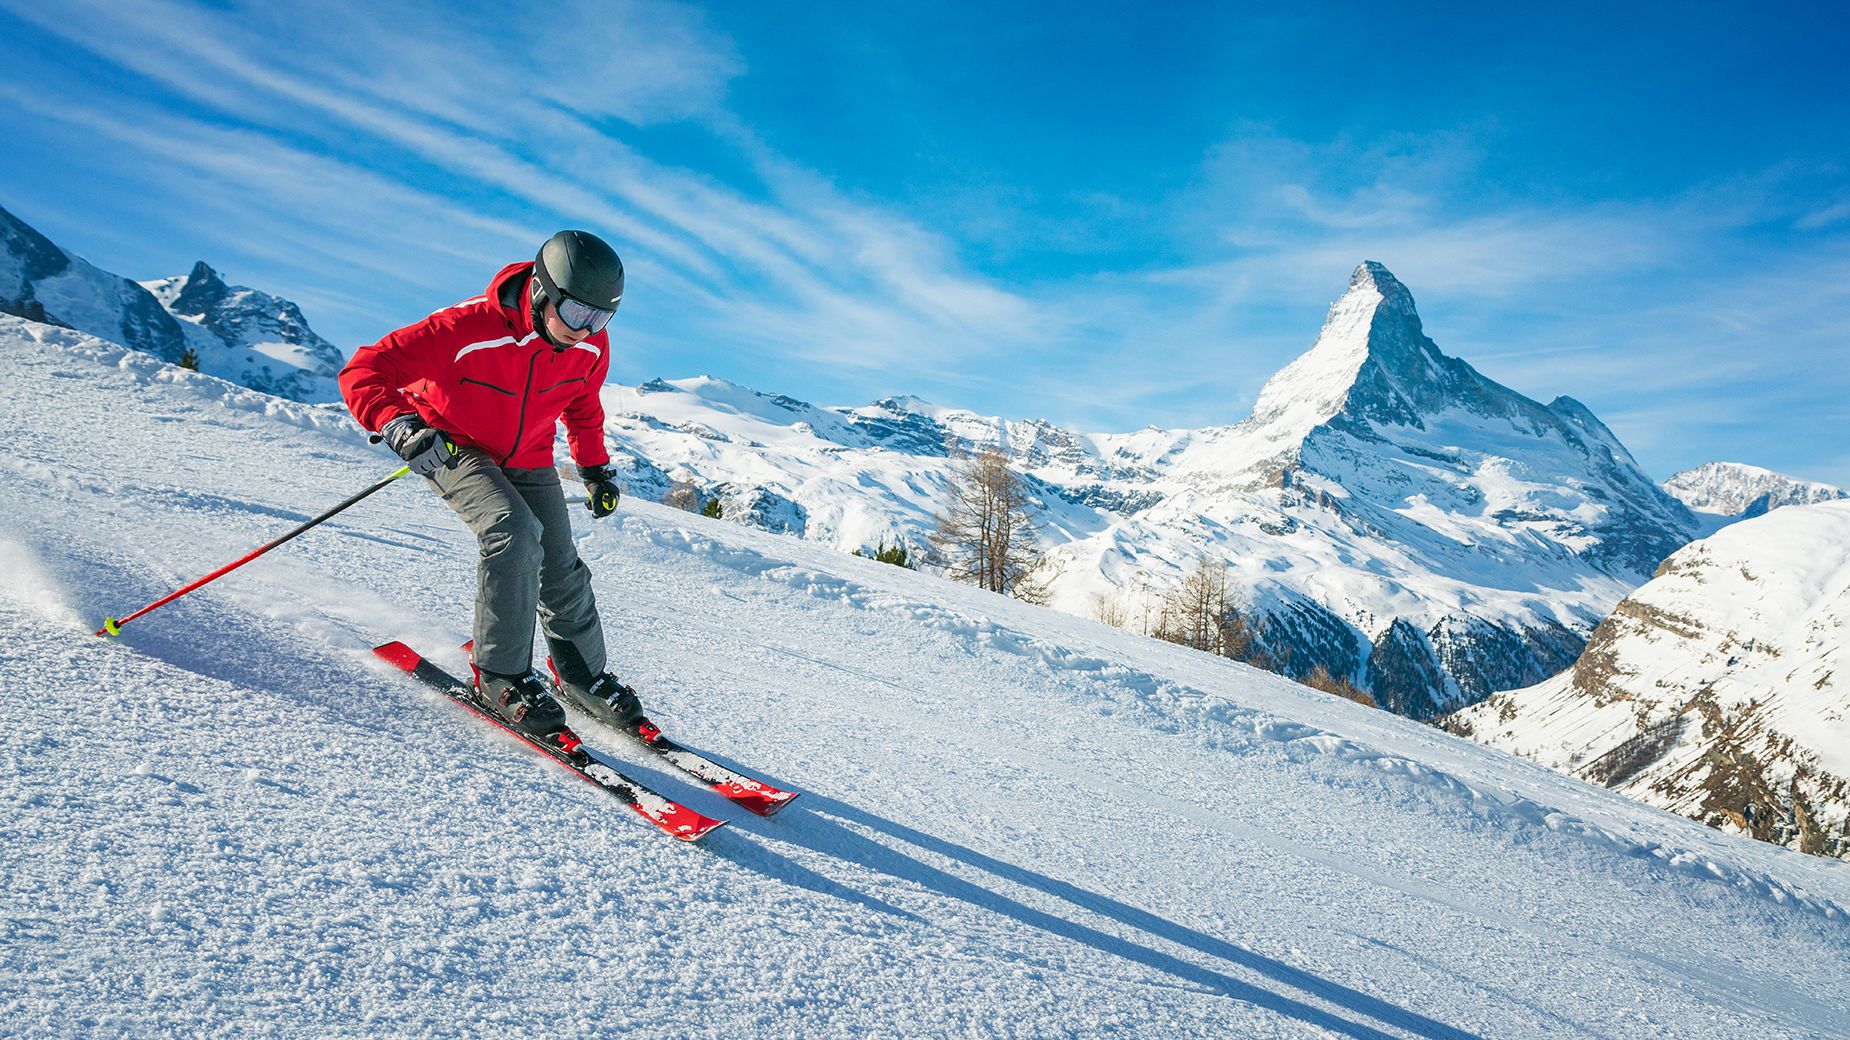 A young skier zips downhill at Zermatt ski resort in Switzerland with the Matterhorn in the background. North Americans might be surprised at how affordable a European ski vacation can be.